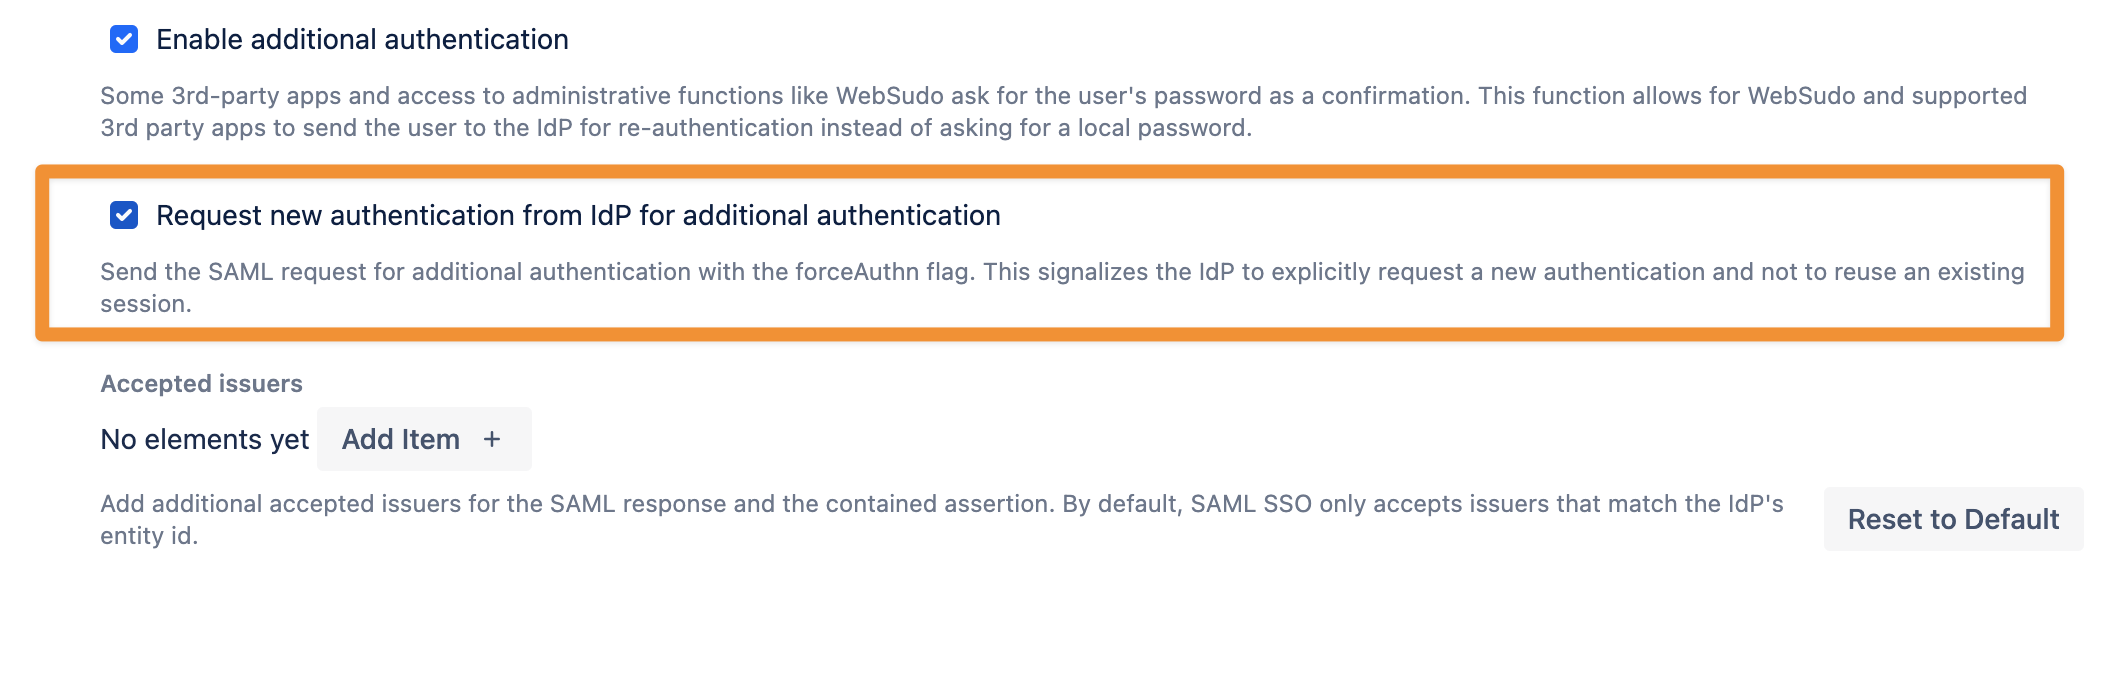 new_authentication_from_idp